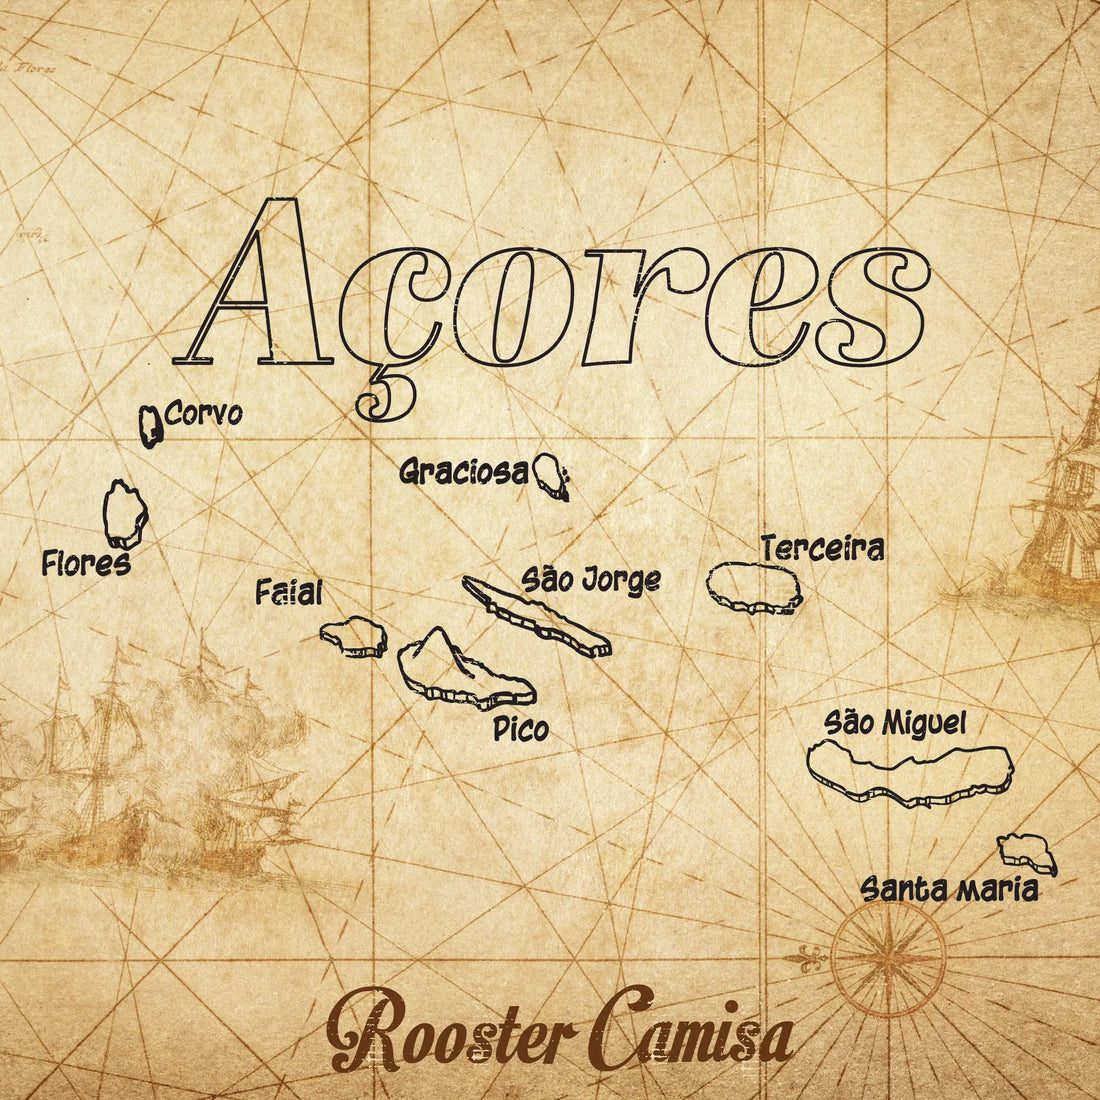 Discovery of the Aores islands. Rooster Camisa